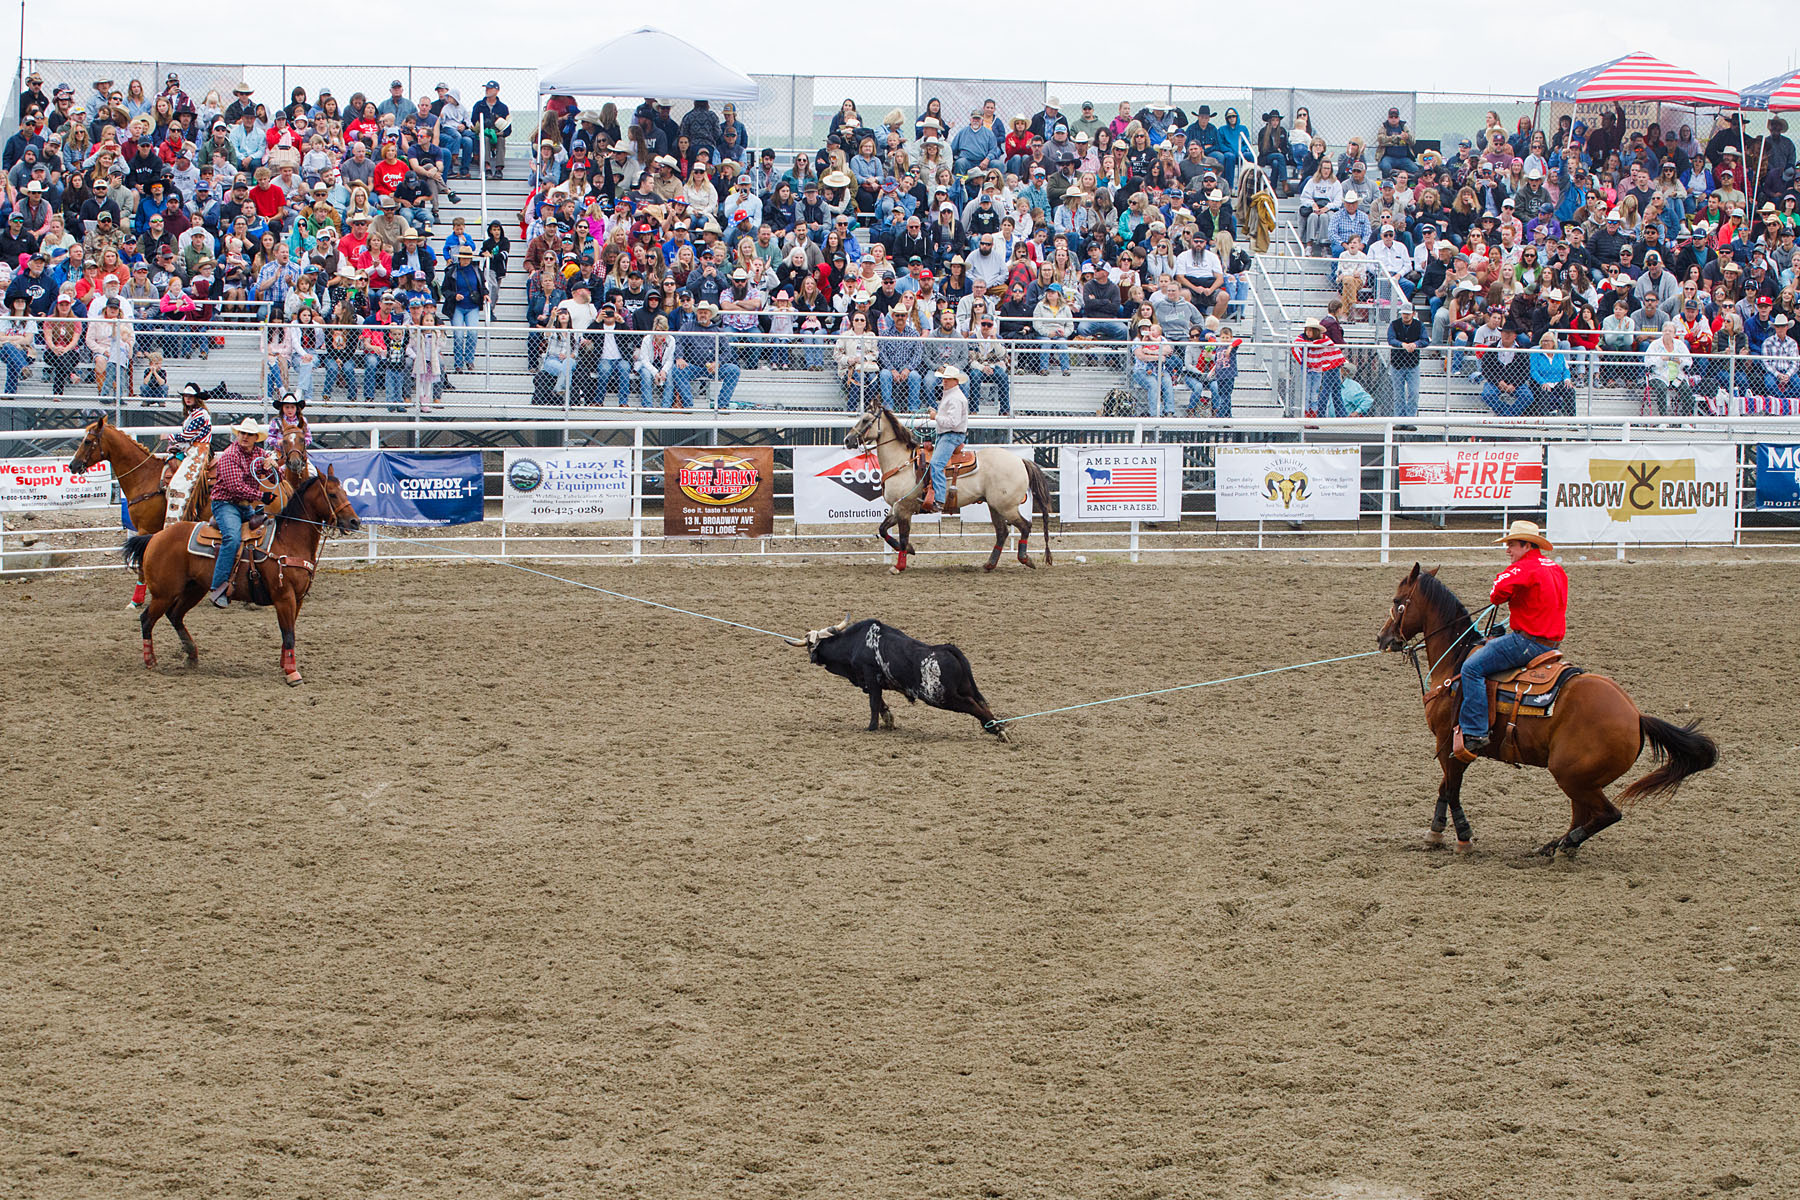 This is what it looks like if you do it right.  Team Roping, Home of Champions Rodeo, Red Lodge, MT.  Click for next photo.